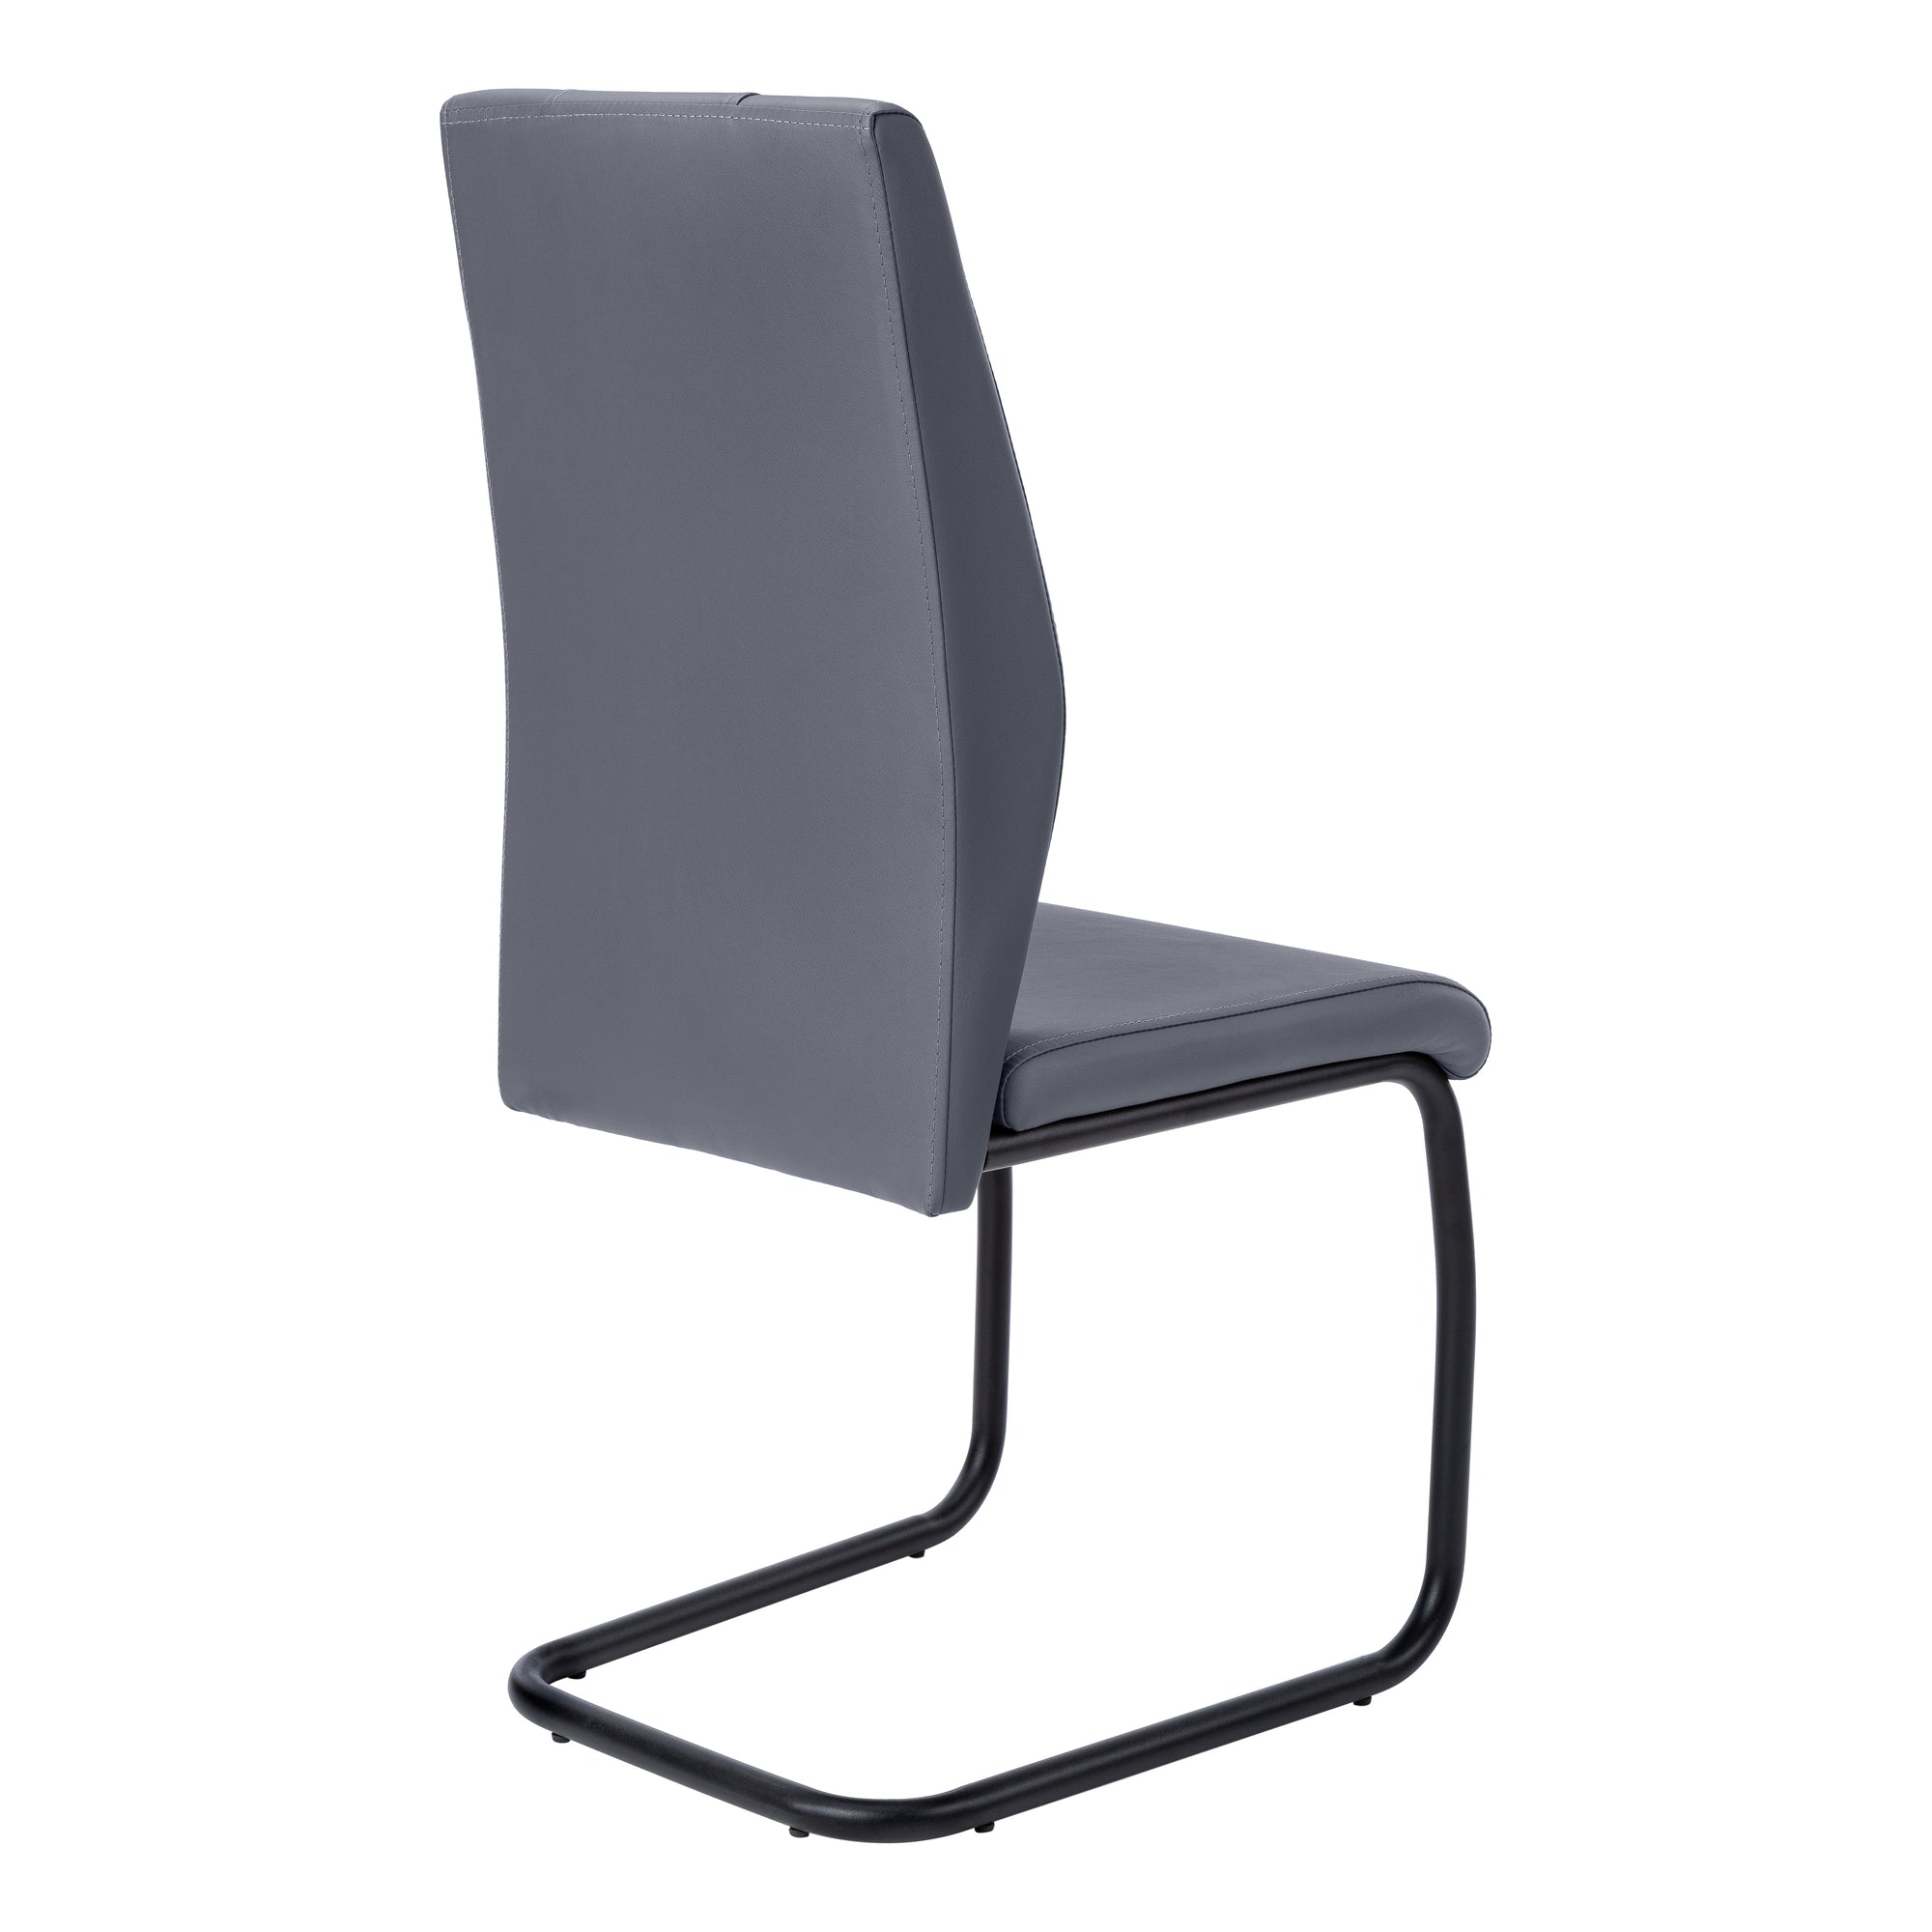 Dining Chair - 2Pcs / 39H / Grey Leather-Look / Metal